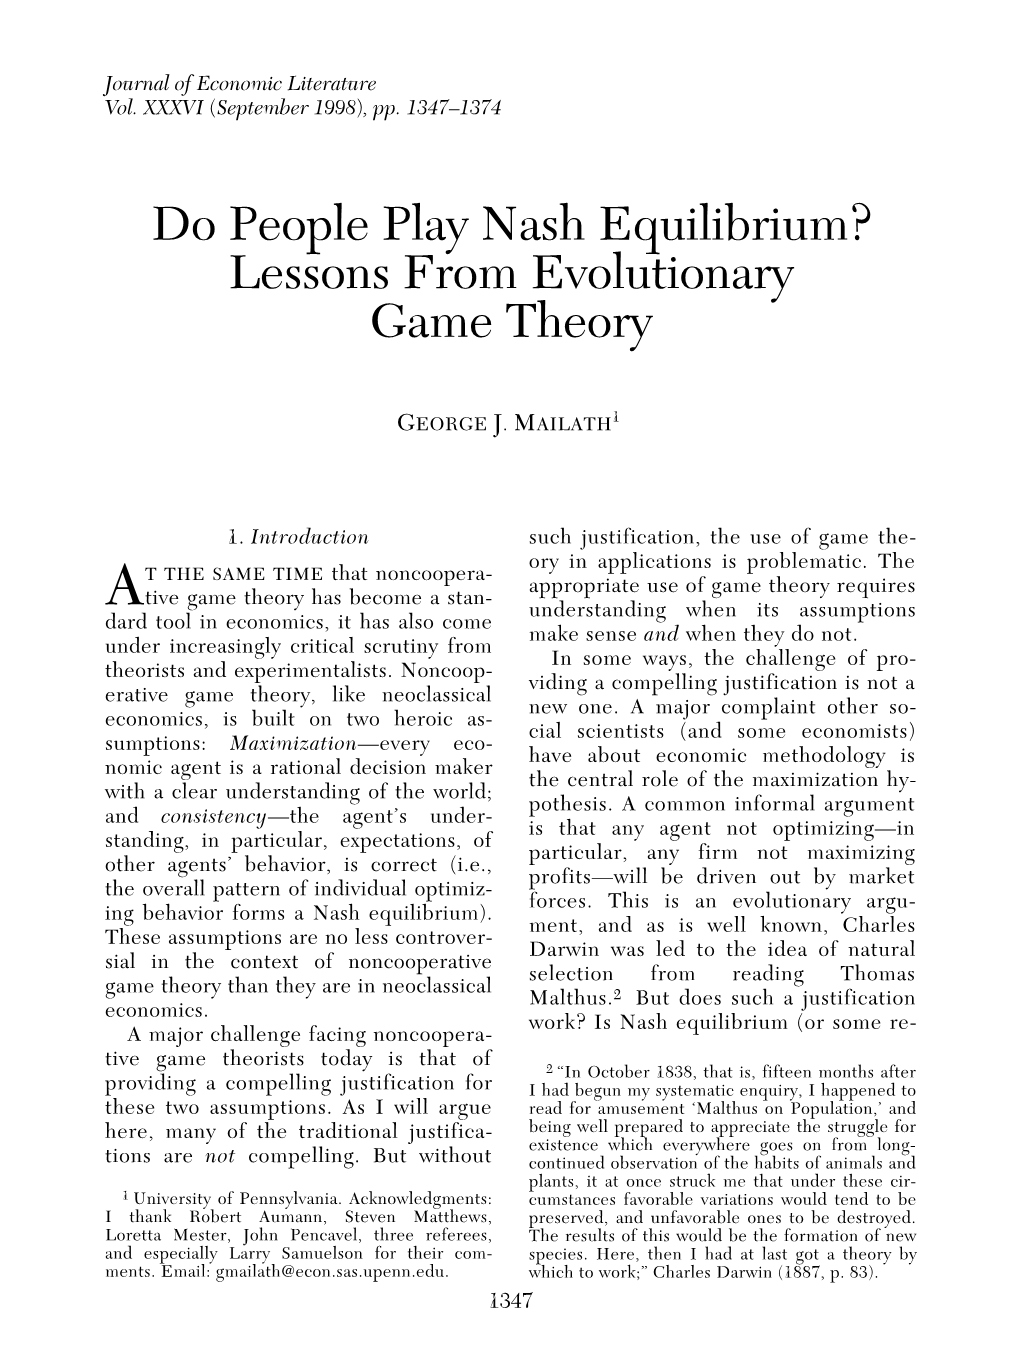 Lessons from Evolutionary Game Theory